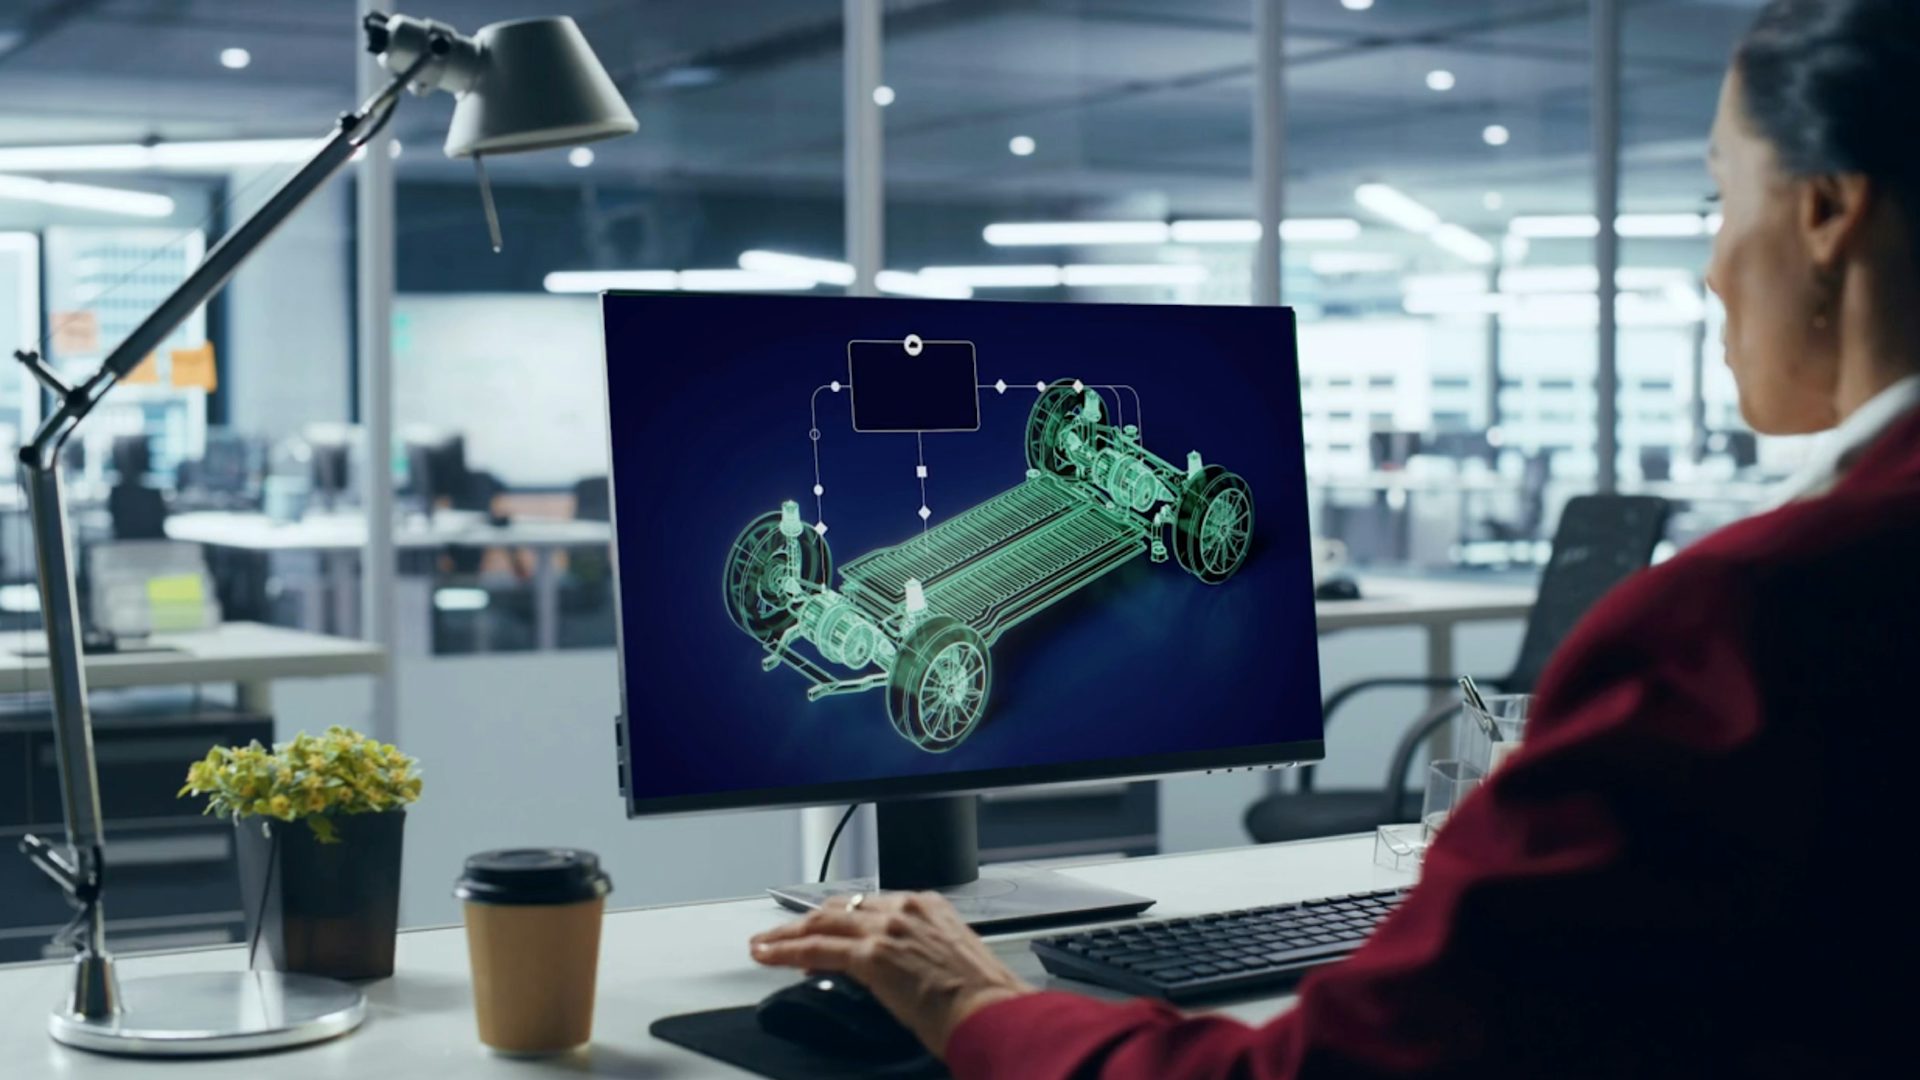 An engineer works on edrive systems using electric vehicle simulation software.